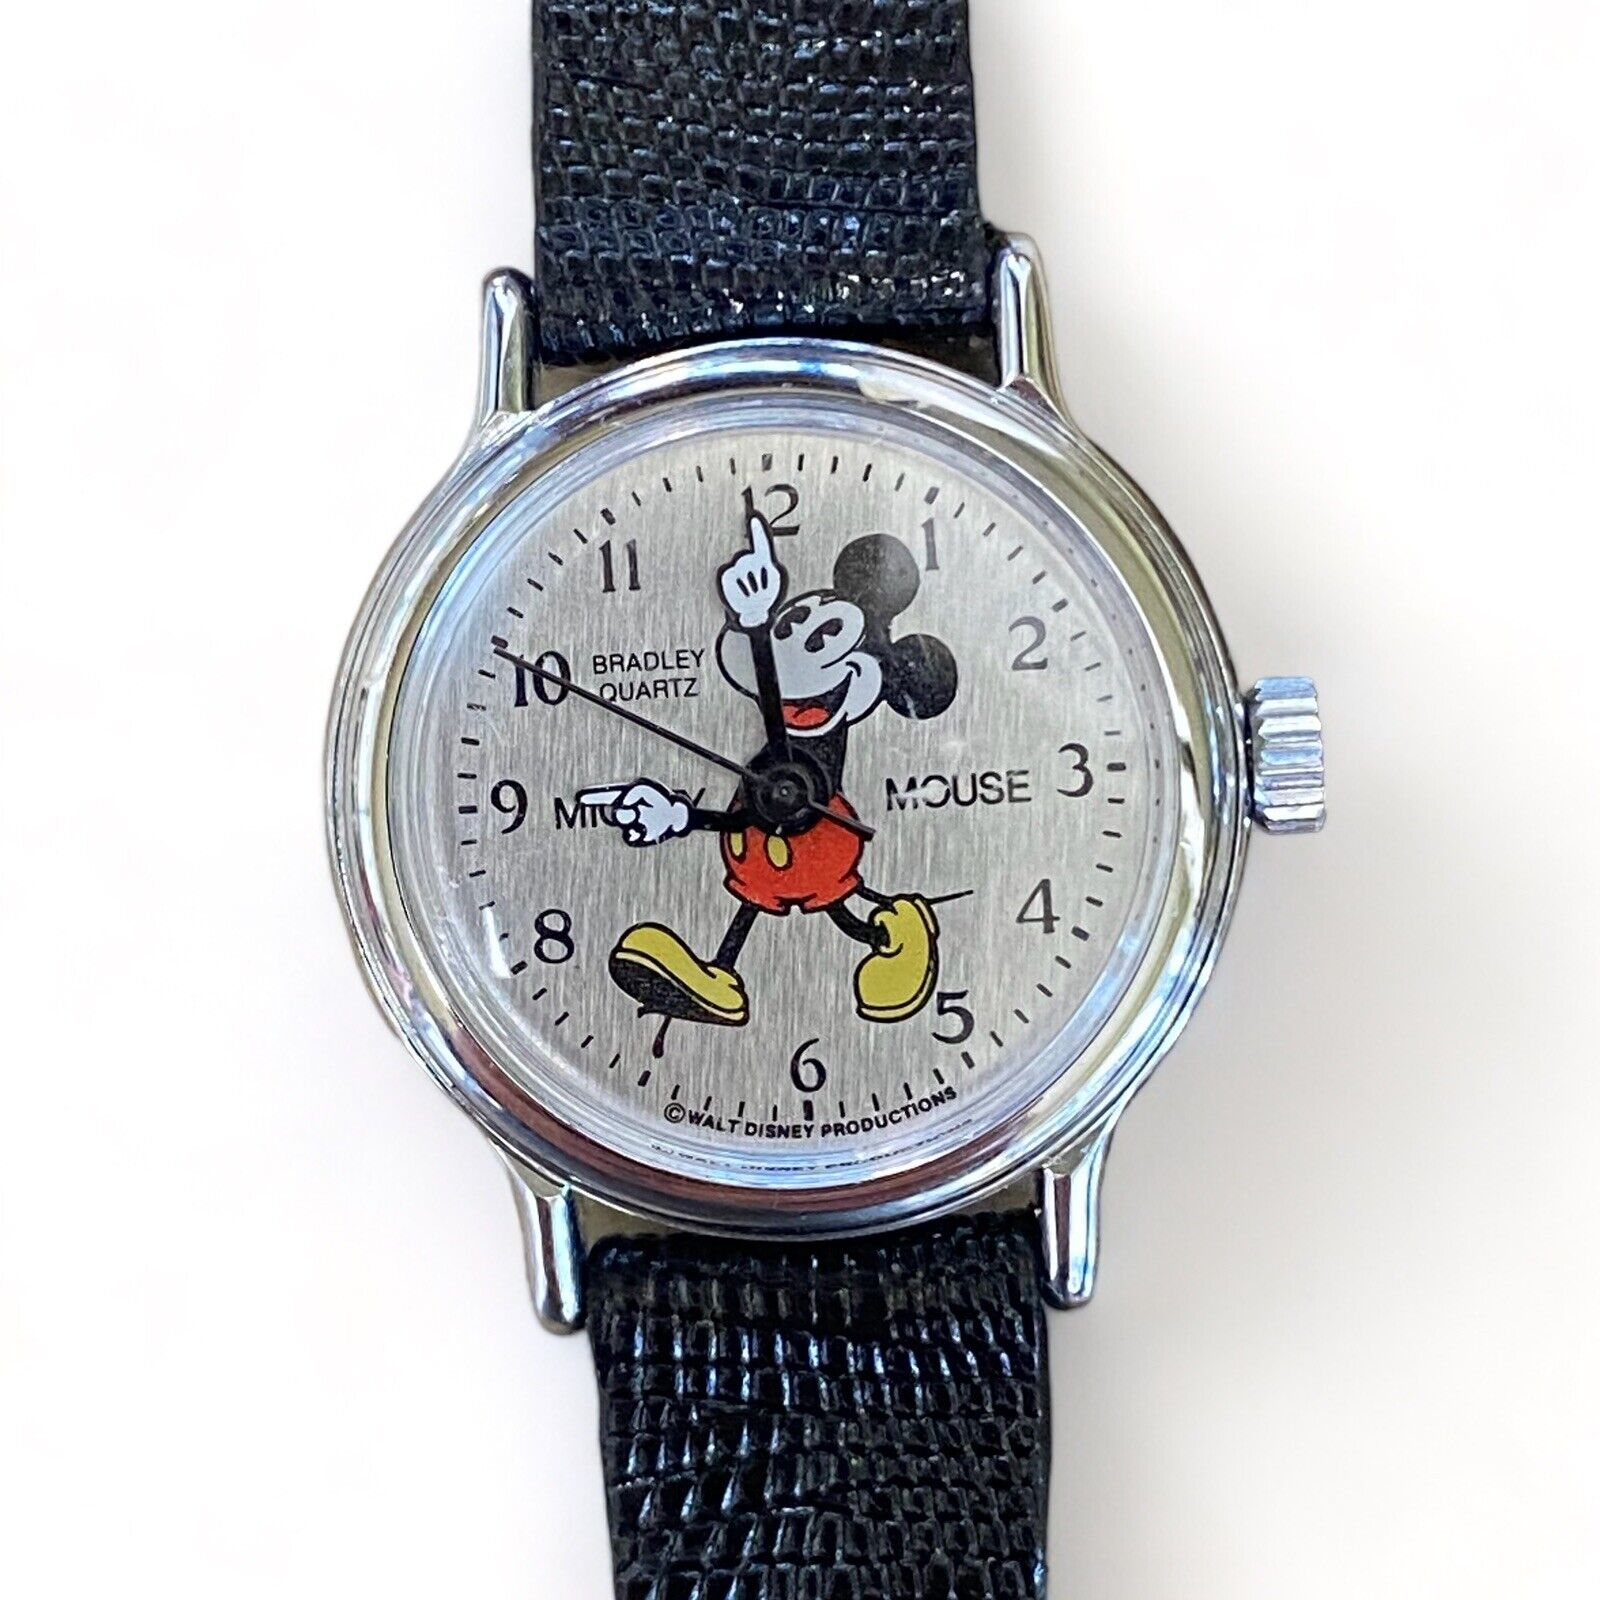 VTG 1978 Bradley Quartz Watch 50 Years of Time with Mickey Ltd. Ed. Numbered